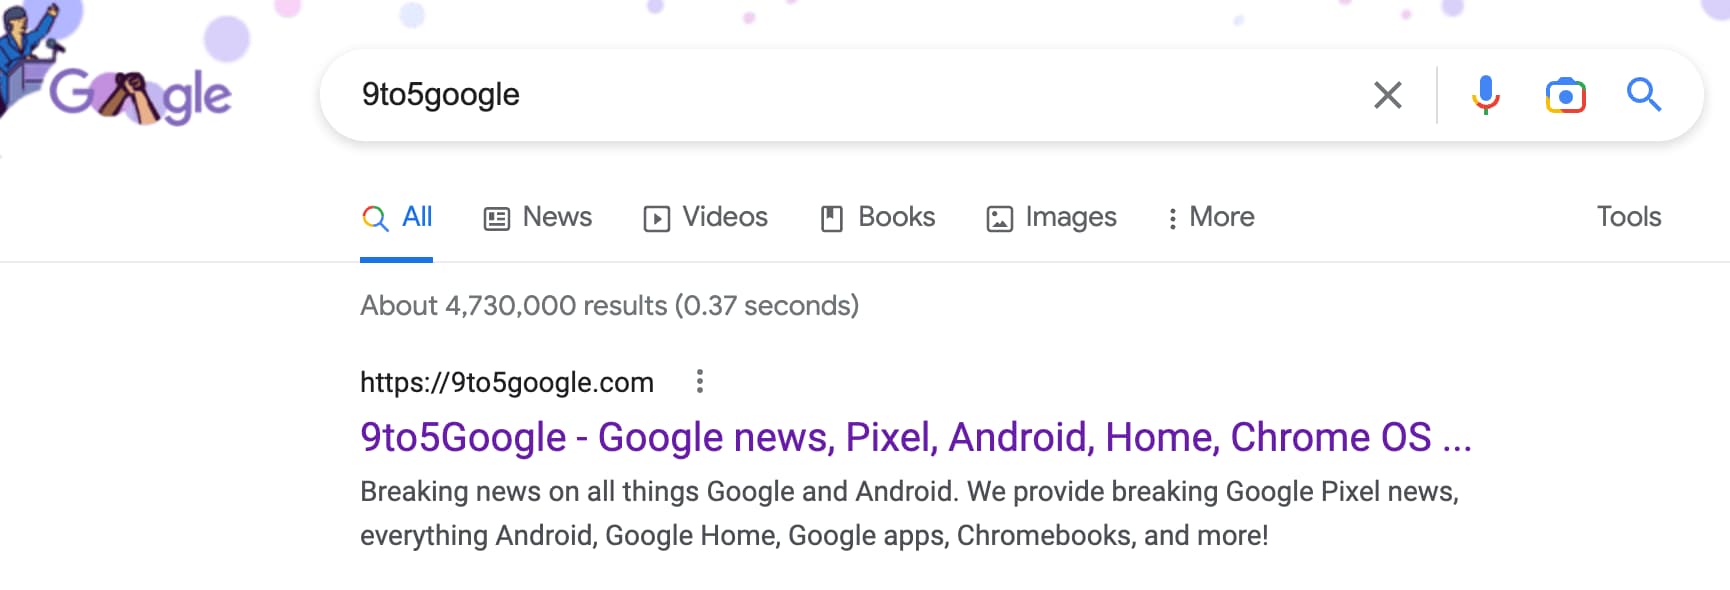 Google adding site favicons to desktop Search results